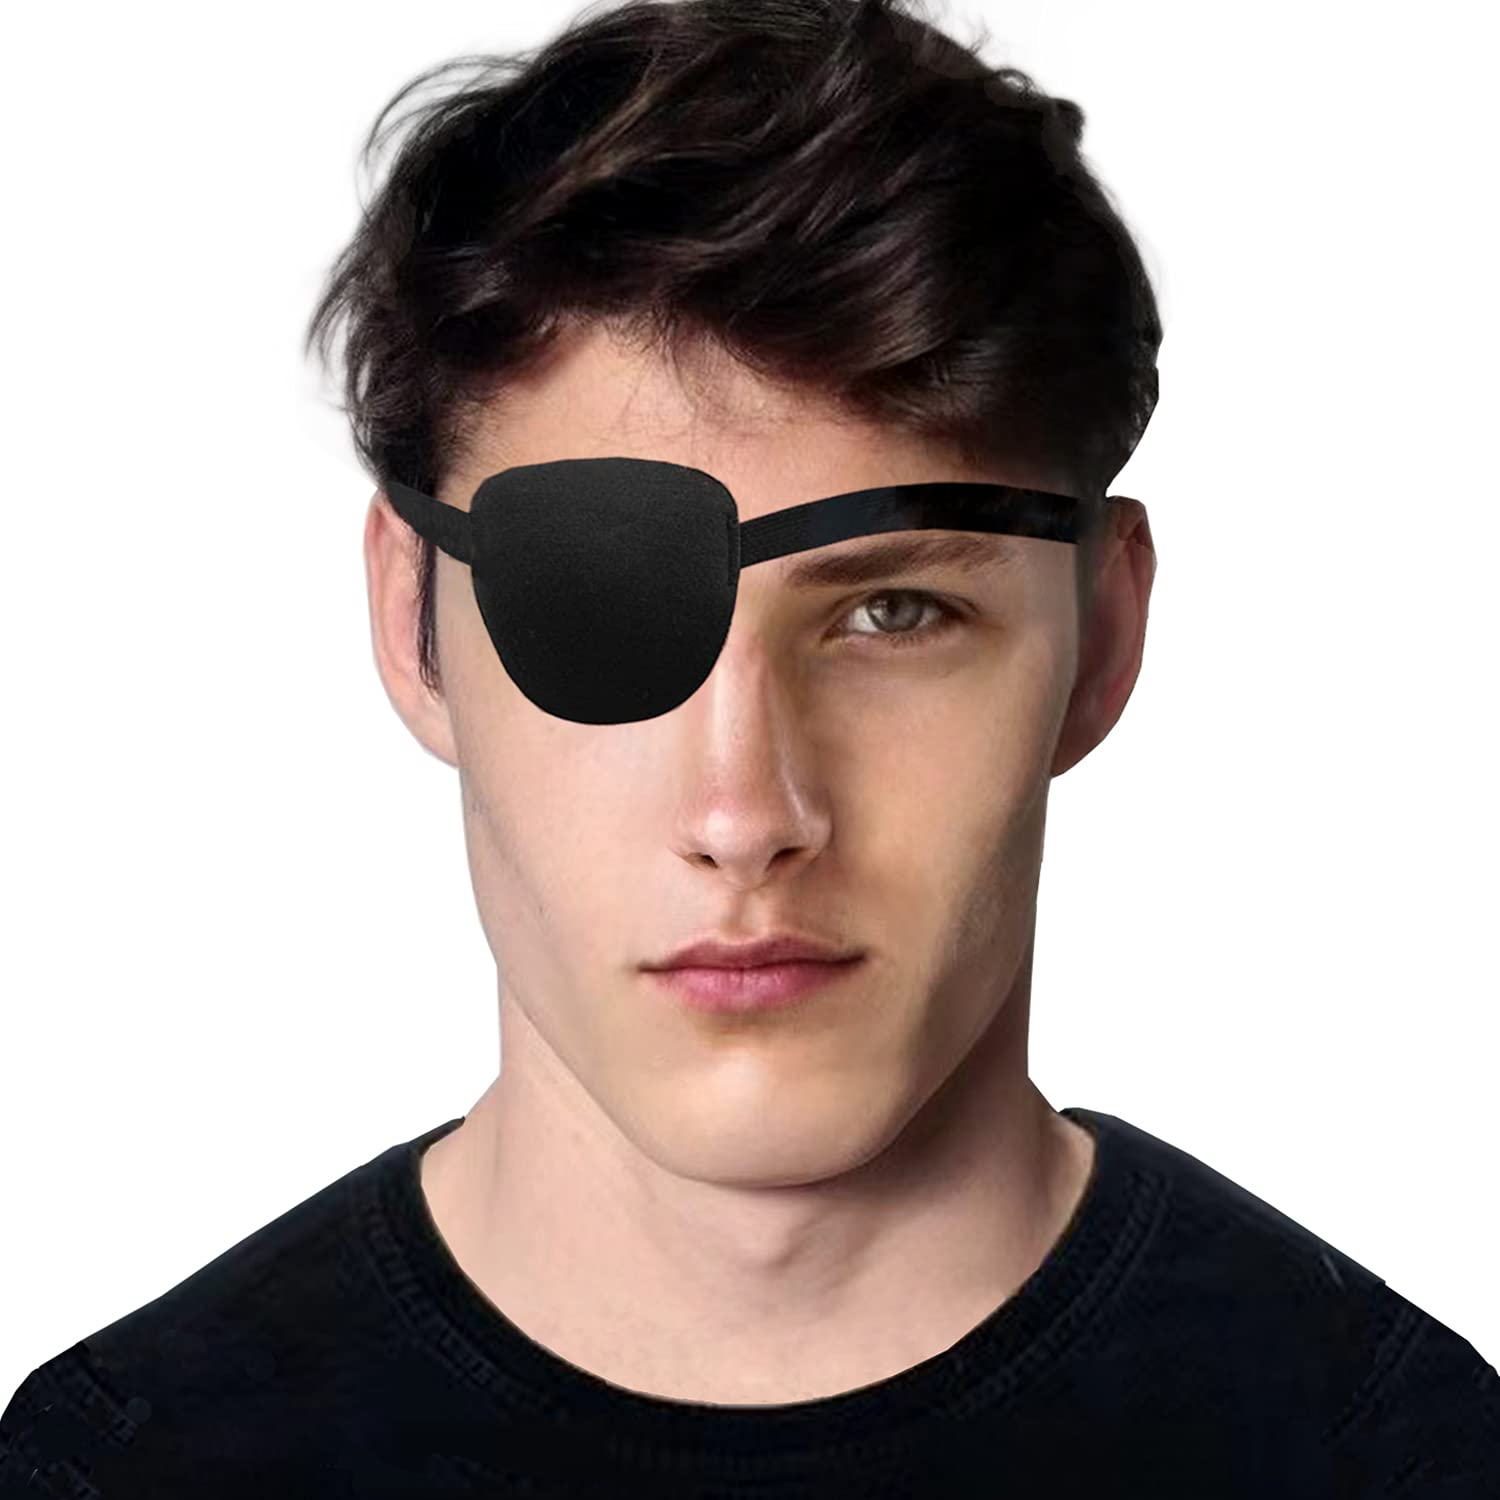 Close up view of a guy rocking the eye patch